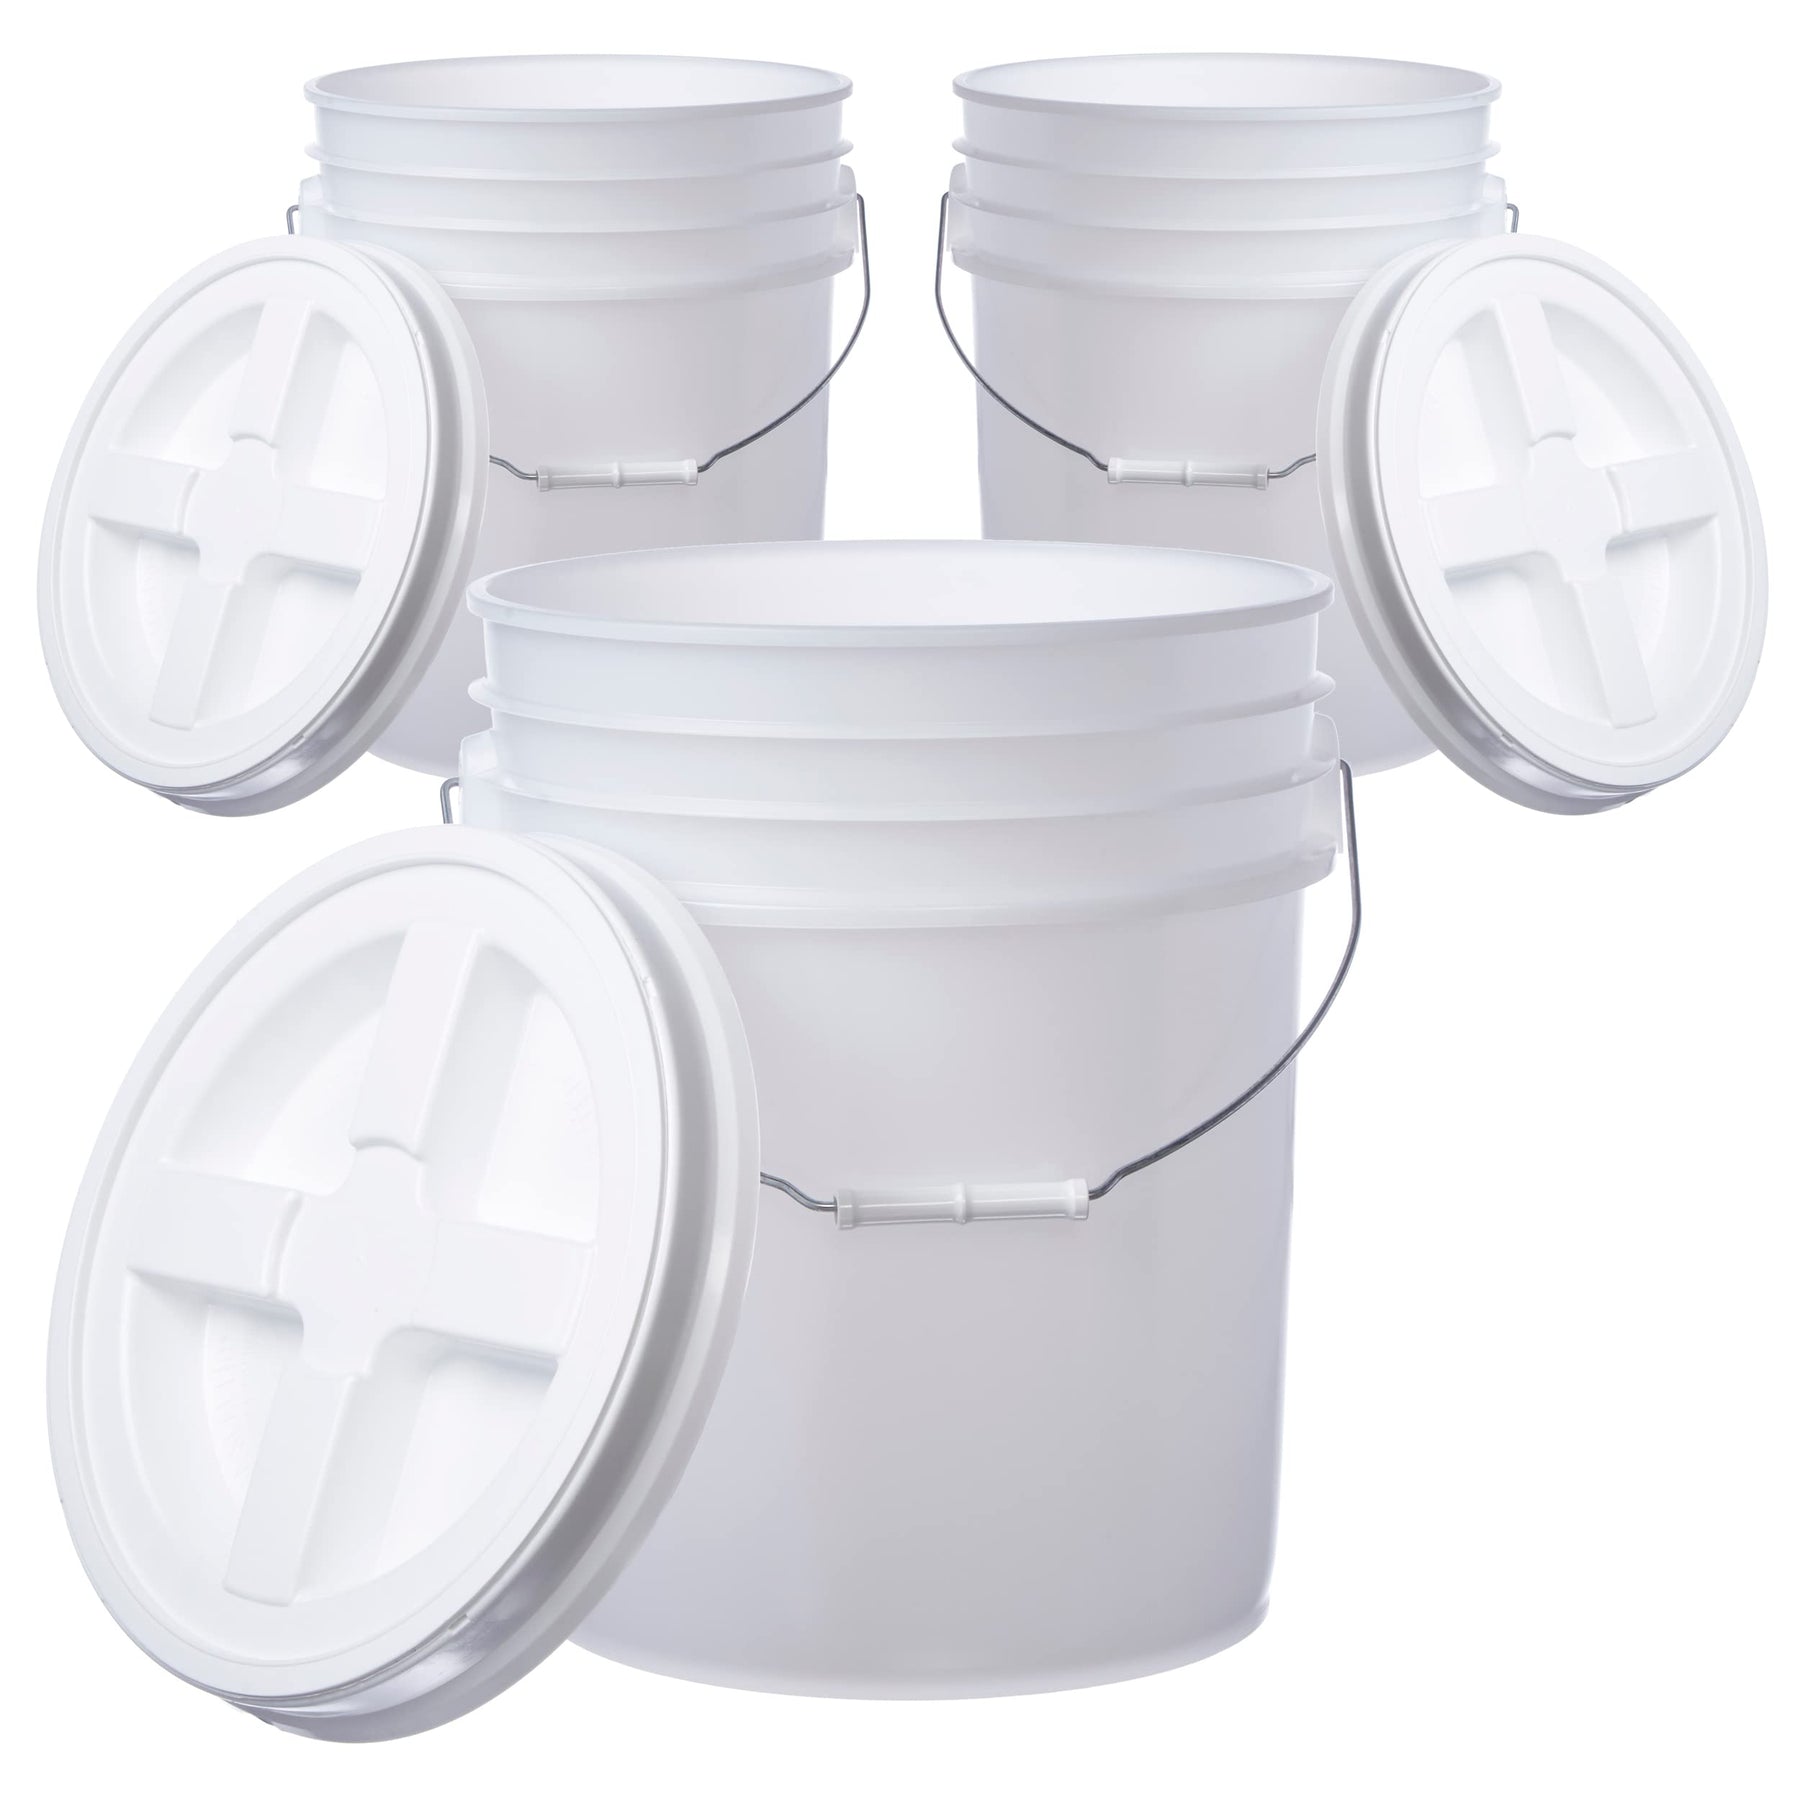 Consolidated Plastics 2 Gallon Food Grade Buckets, BPA Free Container  Storage, Durable HDPE Pails, Made in USA (6 Pack, White) - NO LIDS